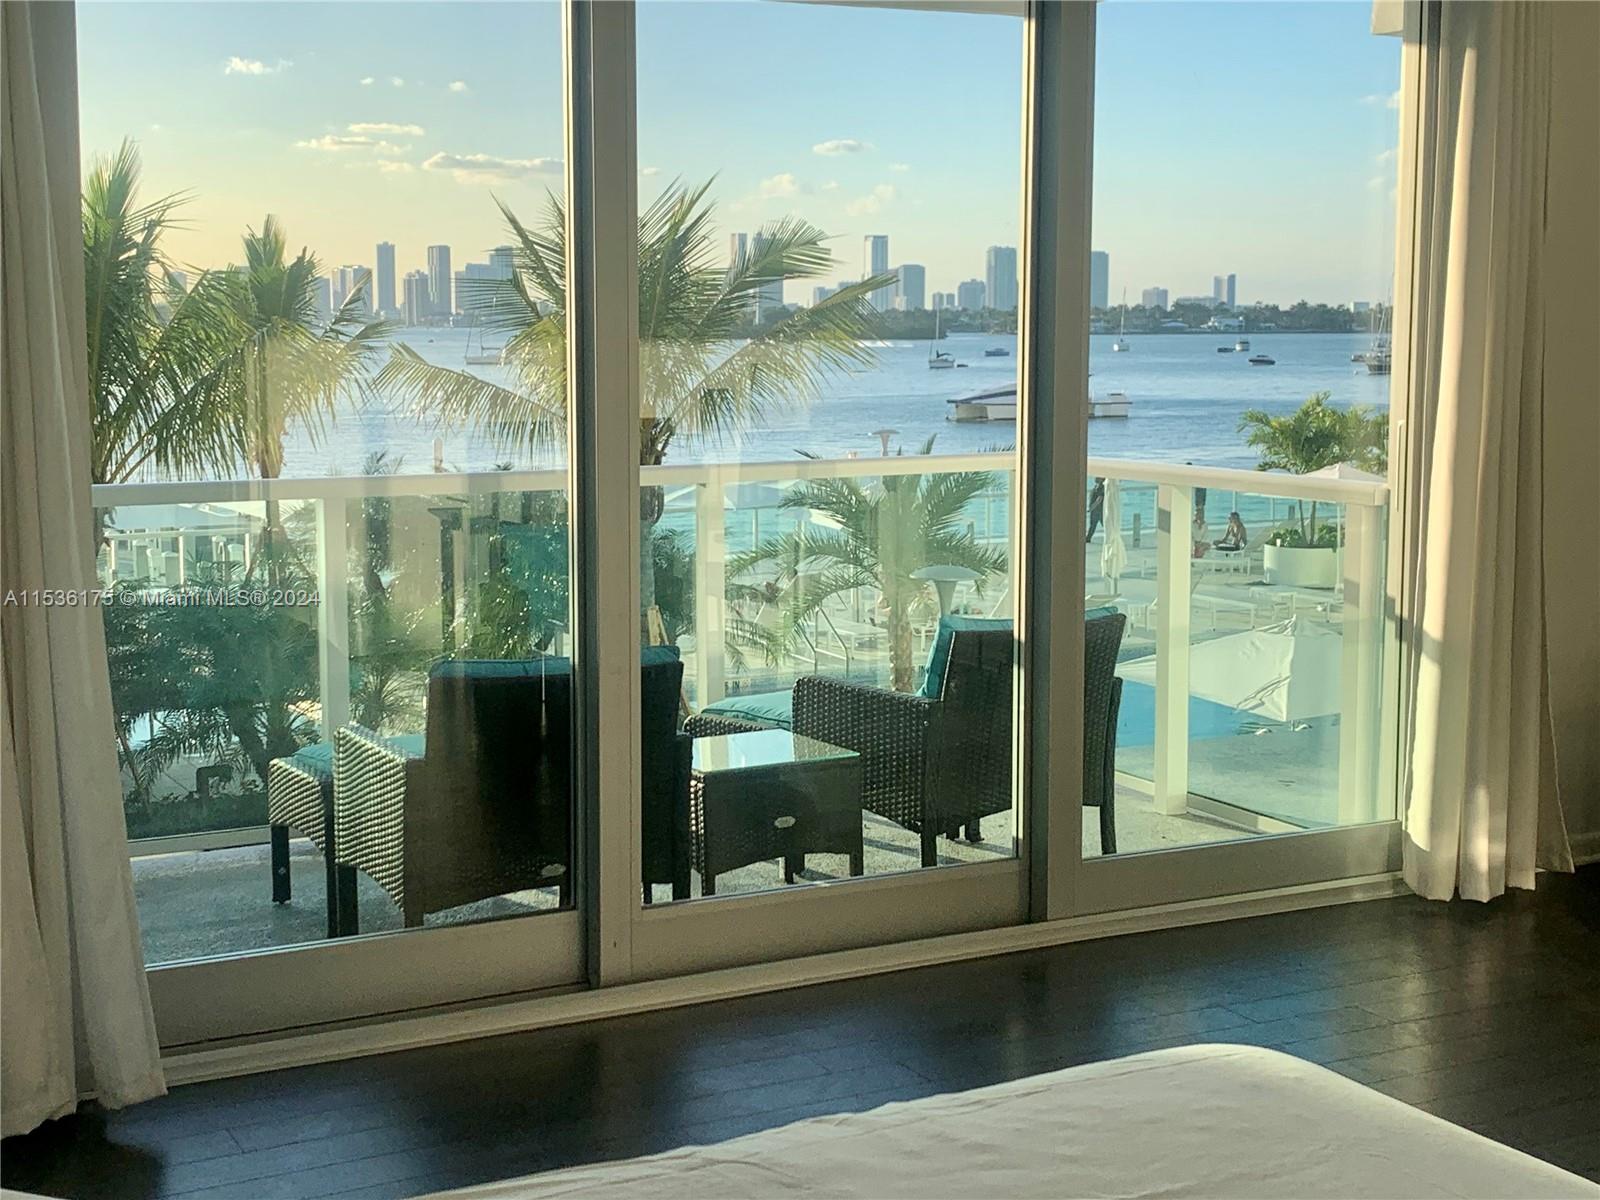 *** Best deal with Assigned parking, Balcony on the Bay like on a Boat from your bed, on stunning sunsets Bay & downtown views *** One of the best places to rent in South Beach Resort Style, 5000 Sf Fitness Center, next to Mondrian with ASSIGNED covered PARKING. Unit Just Repainted with walking closet and more - All New from: Big Smart TV, Fridg, Induction cooktop, hood, Microwave, Fryer * Nice Location: Walk to Starbucks, facing Wholefoods, next to 5 Star Mondrian Hotel, Lincoln Rd & Ocean Drive. Marble bathroom & wood floors. Just Upgraded Building with Pool Renovation, Lobby and hallways redone! Rent includes: Premium HD cable, high speed internet, hot water, Parking place assigned (Value go to $175) 24h security & convenience store over opened long hours.